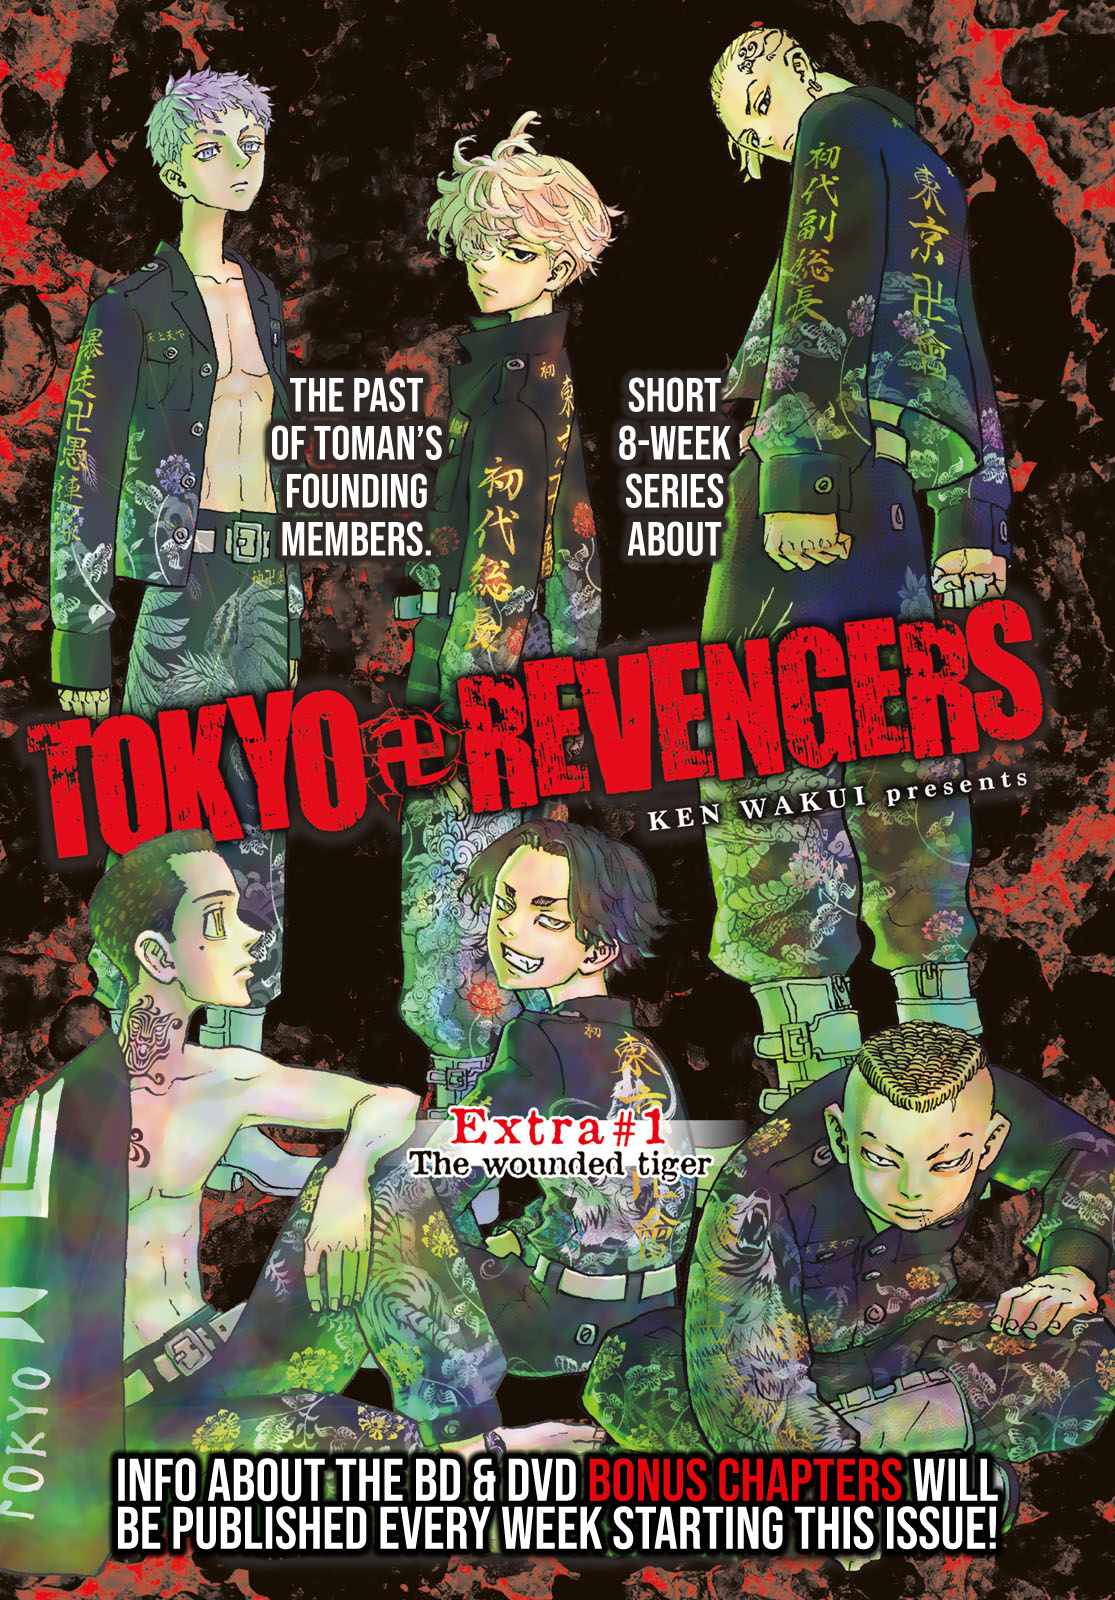 Tokyo Manji Revengers Chapter 278.1: Extra #1: The Wounded Tiger - Picture 1